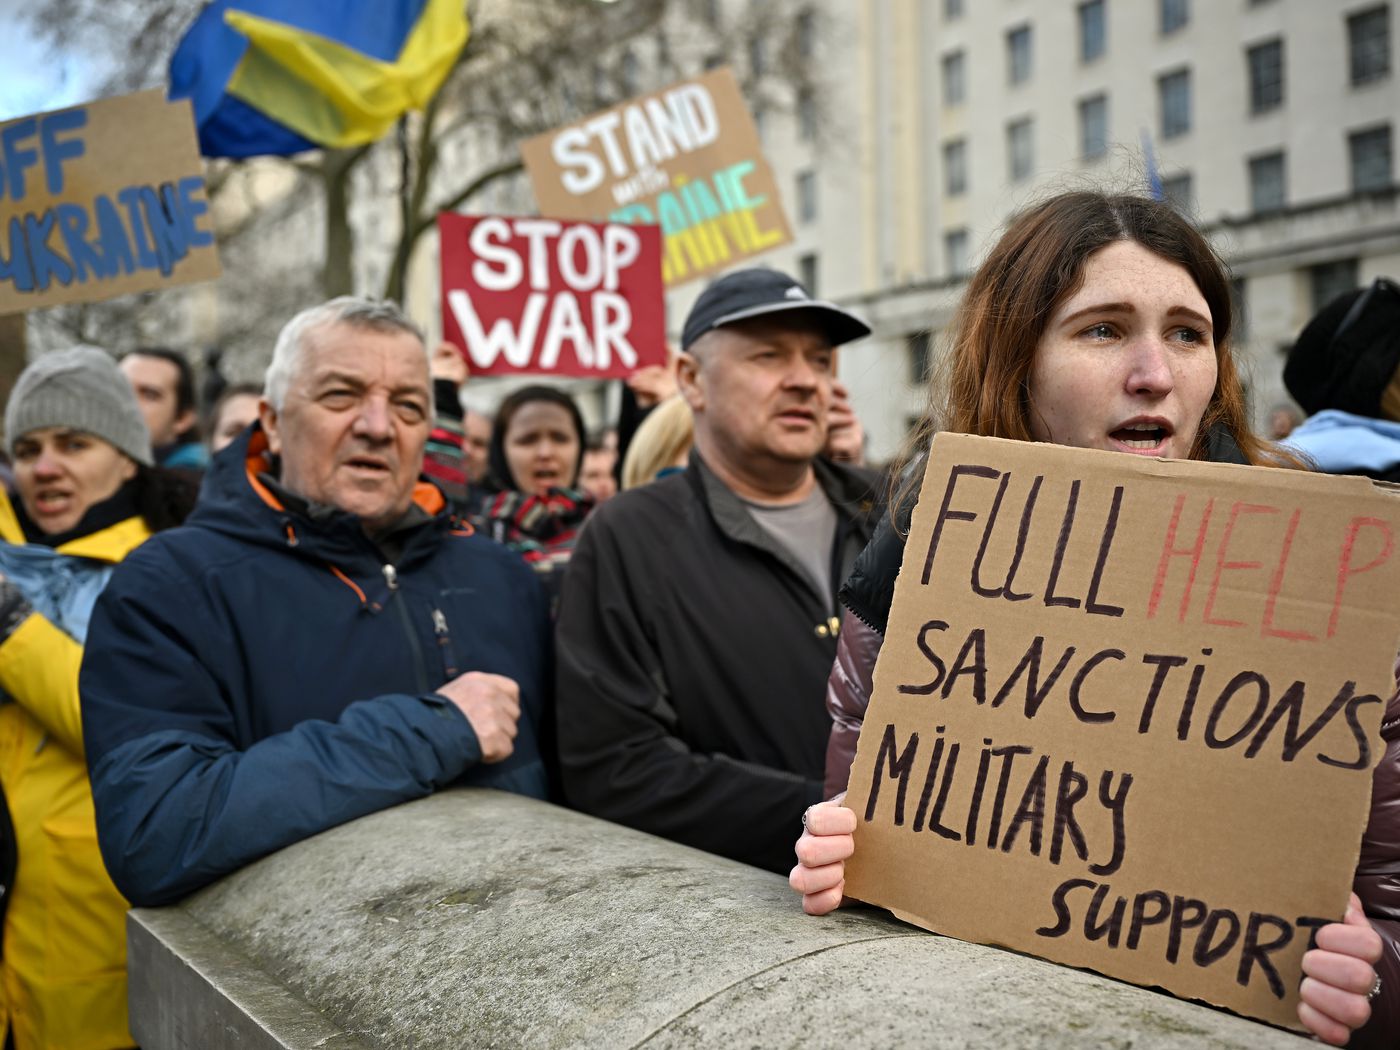 Q3. what are the russian objectives behind the military intervention in ukraine? discuss whether western sanctions can prove effective as an instrument to counter the russian act.